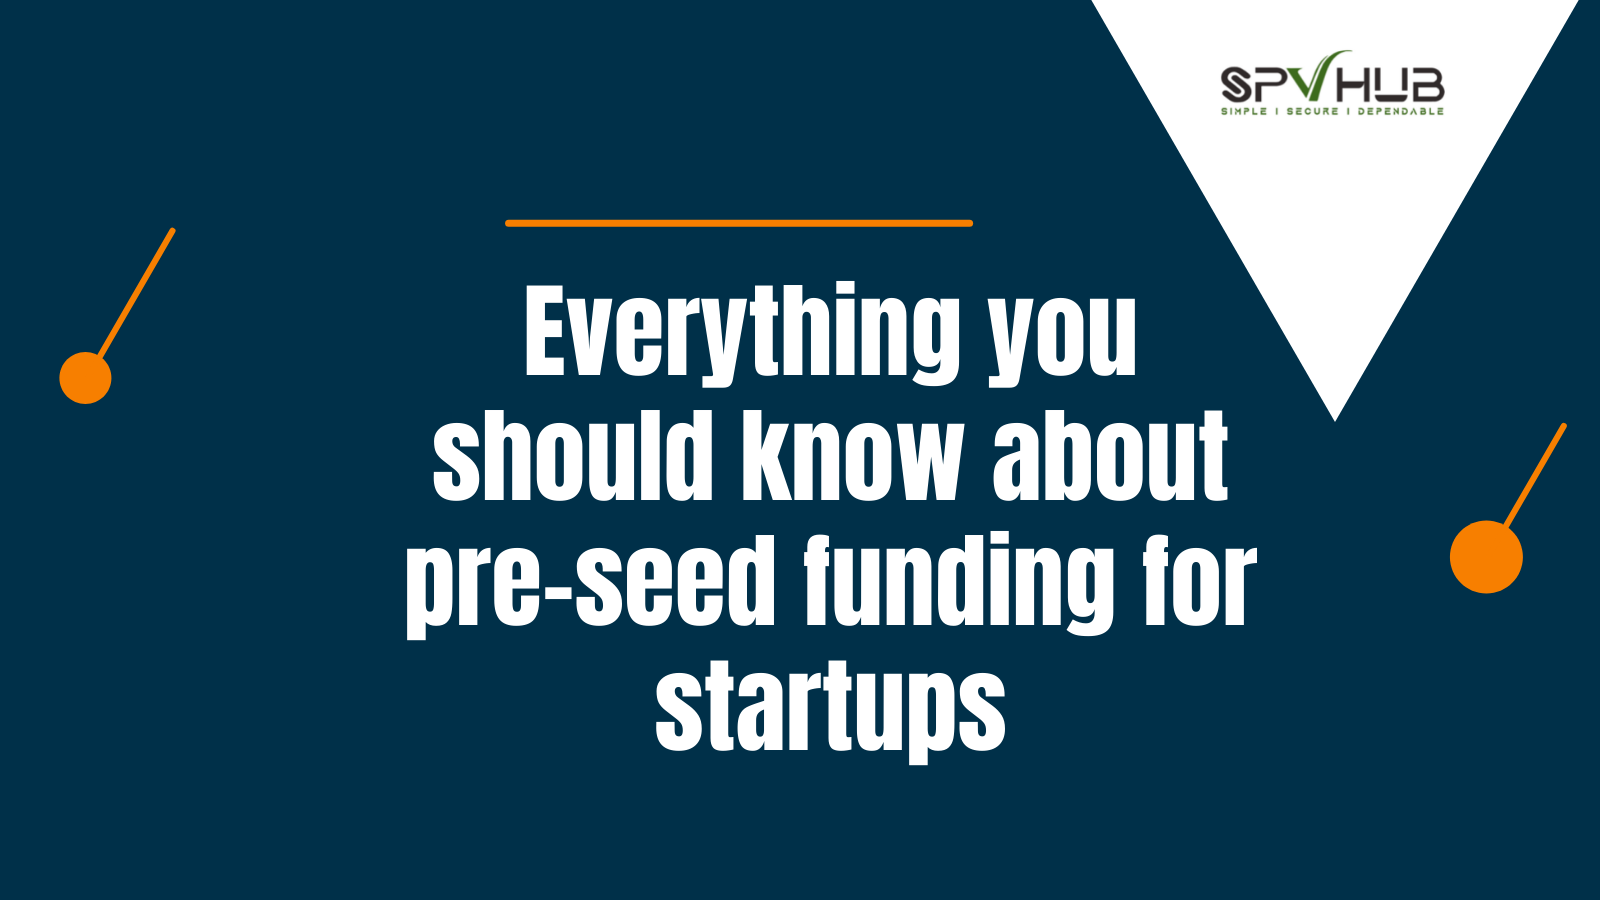 Everything you should know about pre-seed funding for startups